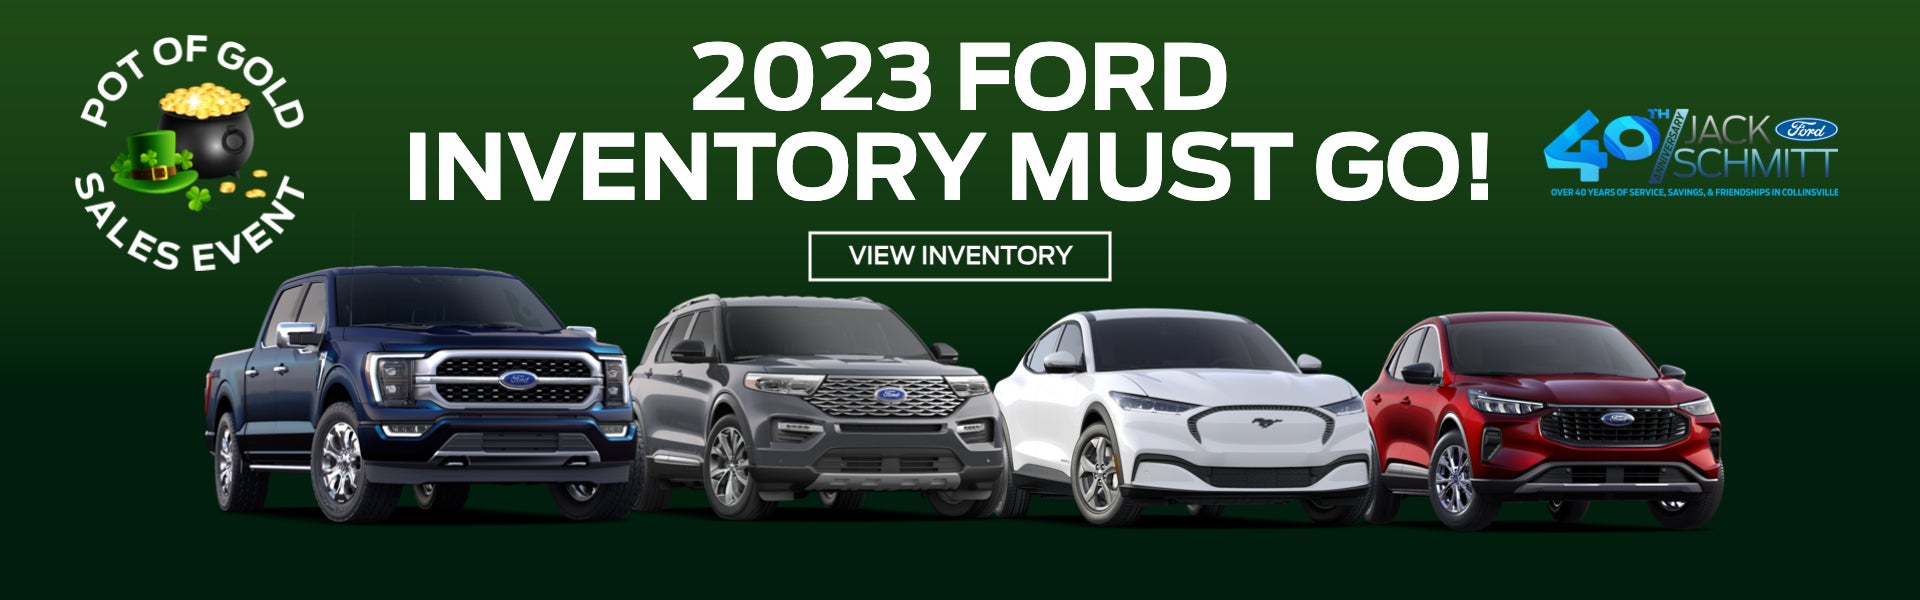 2023 FORD INVENTORY MUST GO